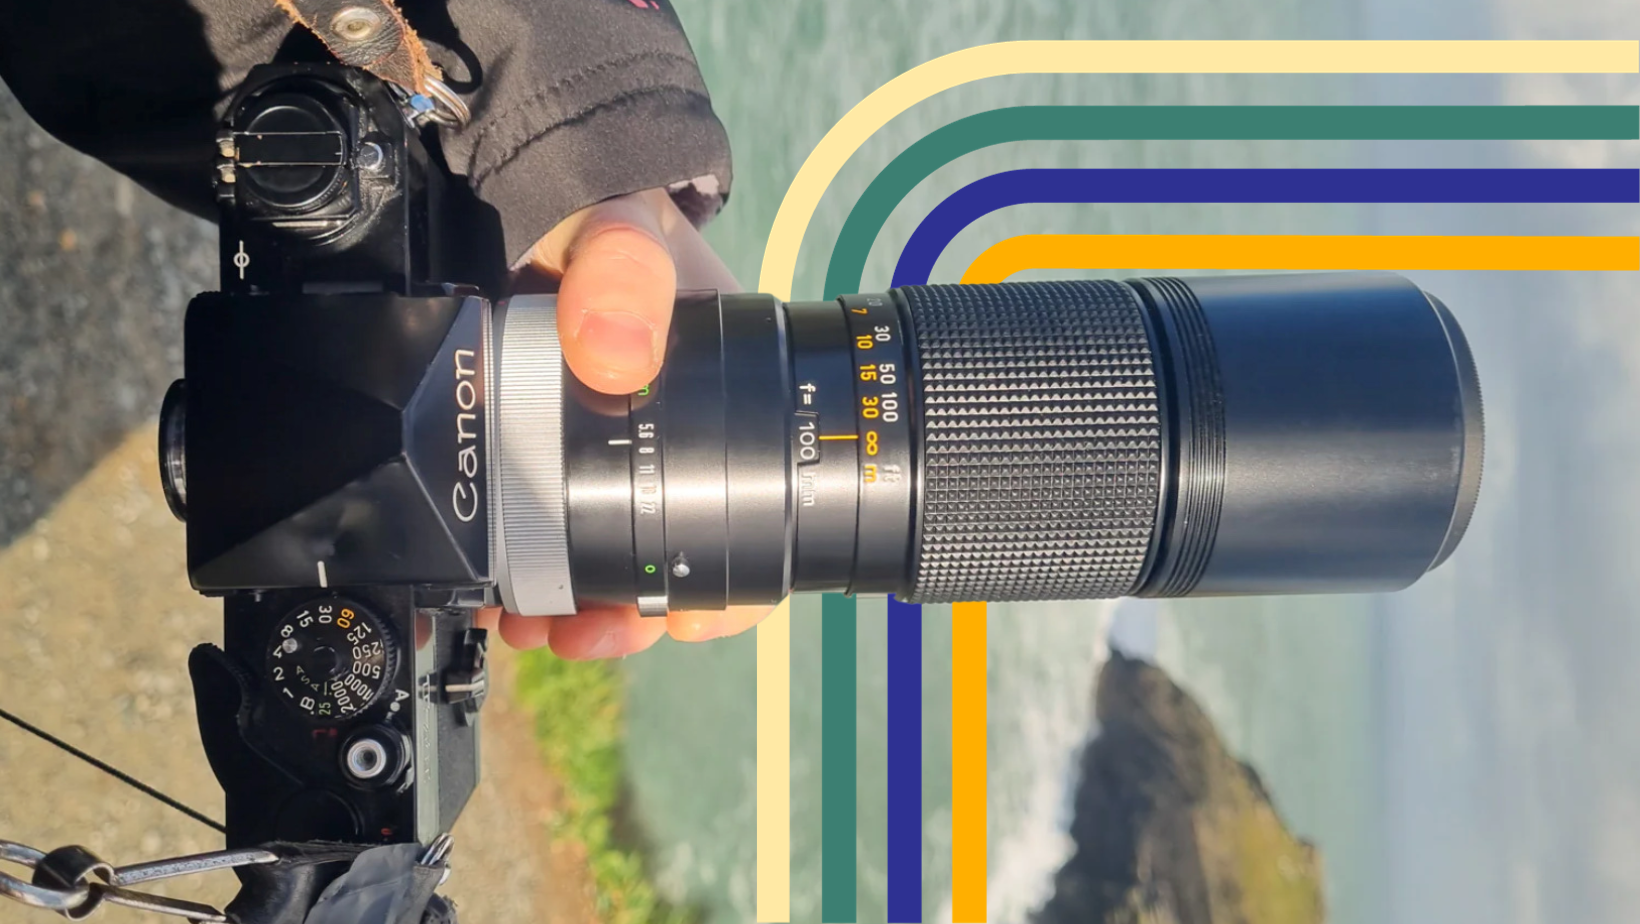 Featured Lens: The Canon 100-200mm f/5.6 Zoom Lens for Canon AE-1